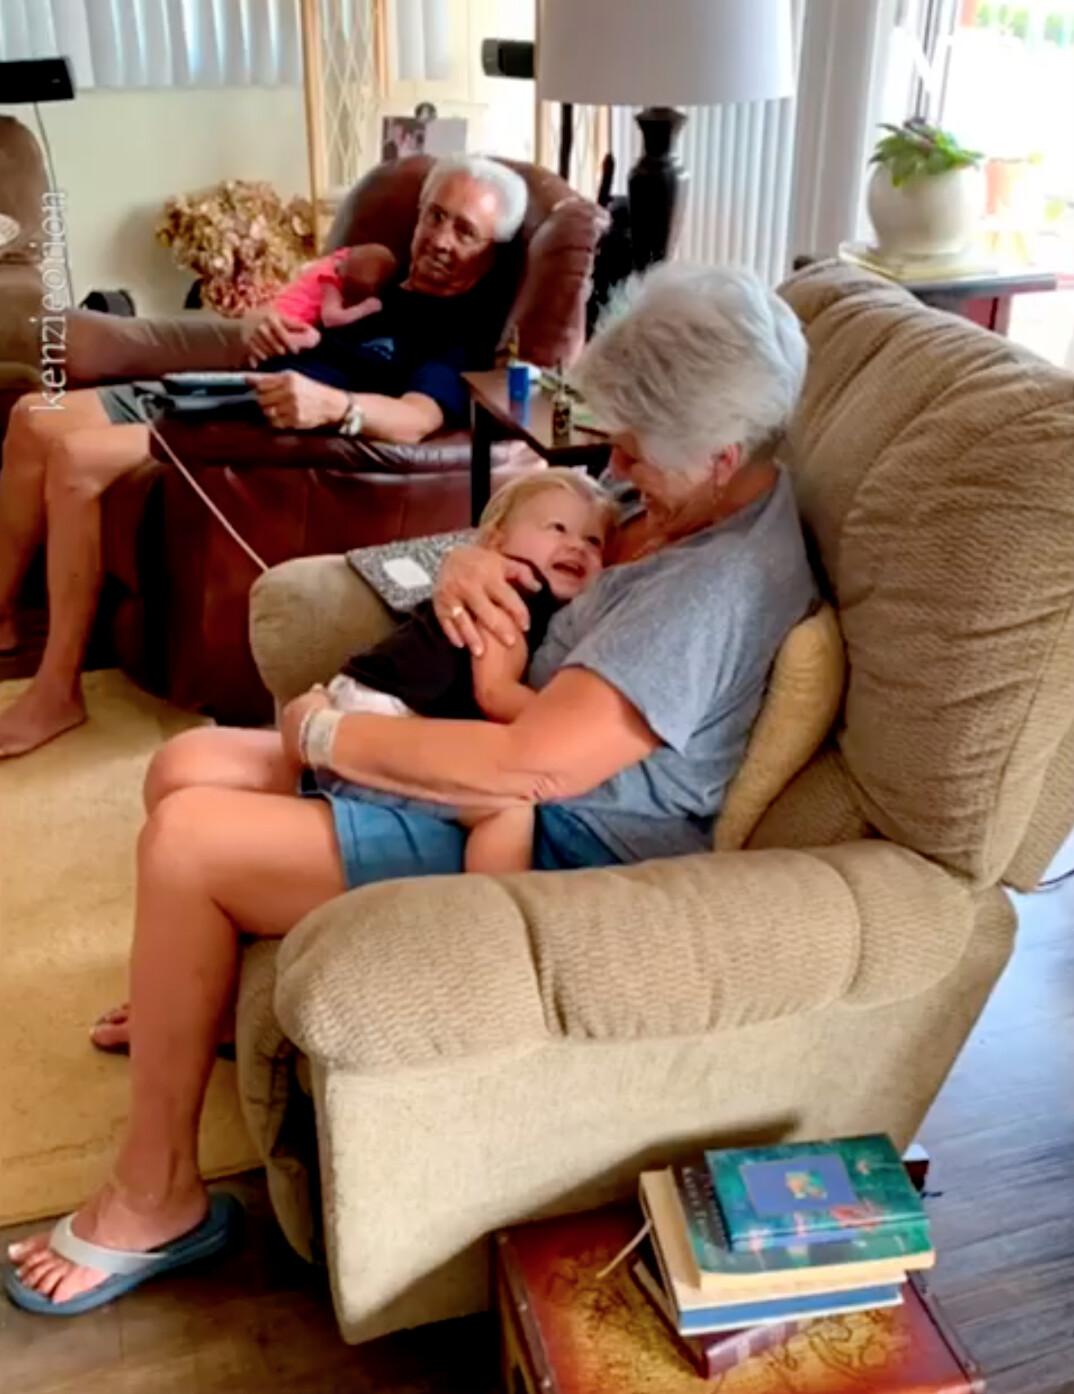 Liz and Charlie cuddling Mackenzie and Kyle's babies, James and Rory. (Courtesy of <a href="https://www.instagram.com/kenzieorion/">Mackenzie Orion Harrison</a>)